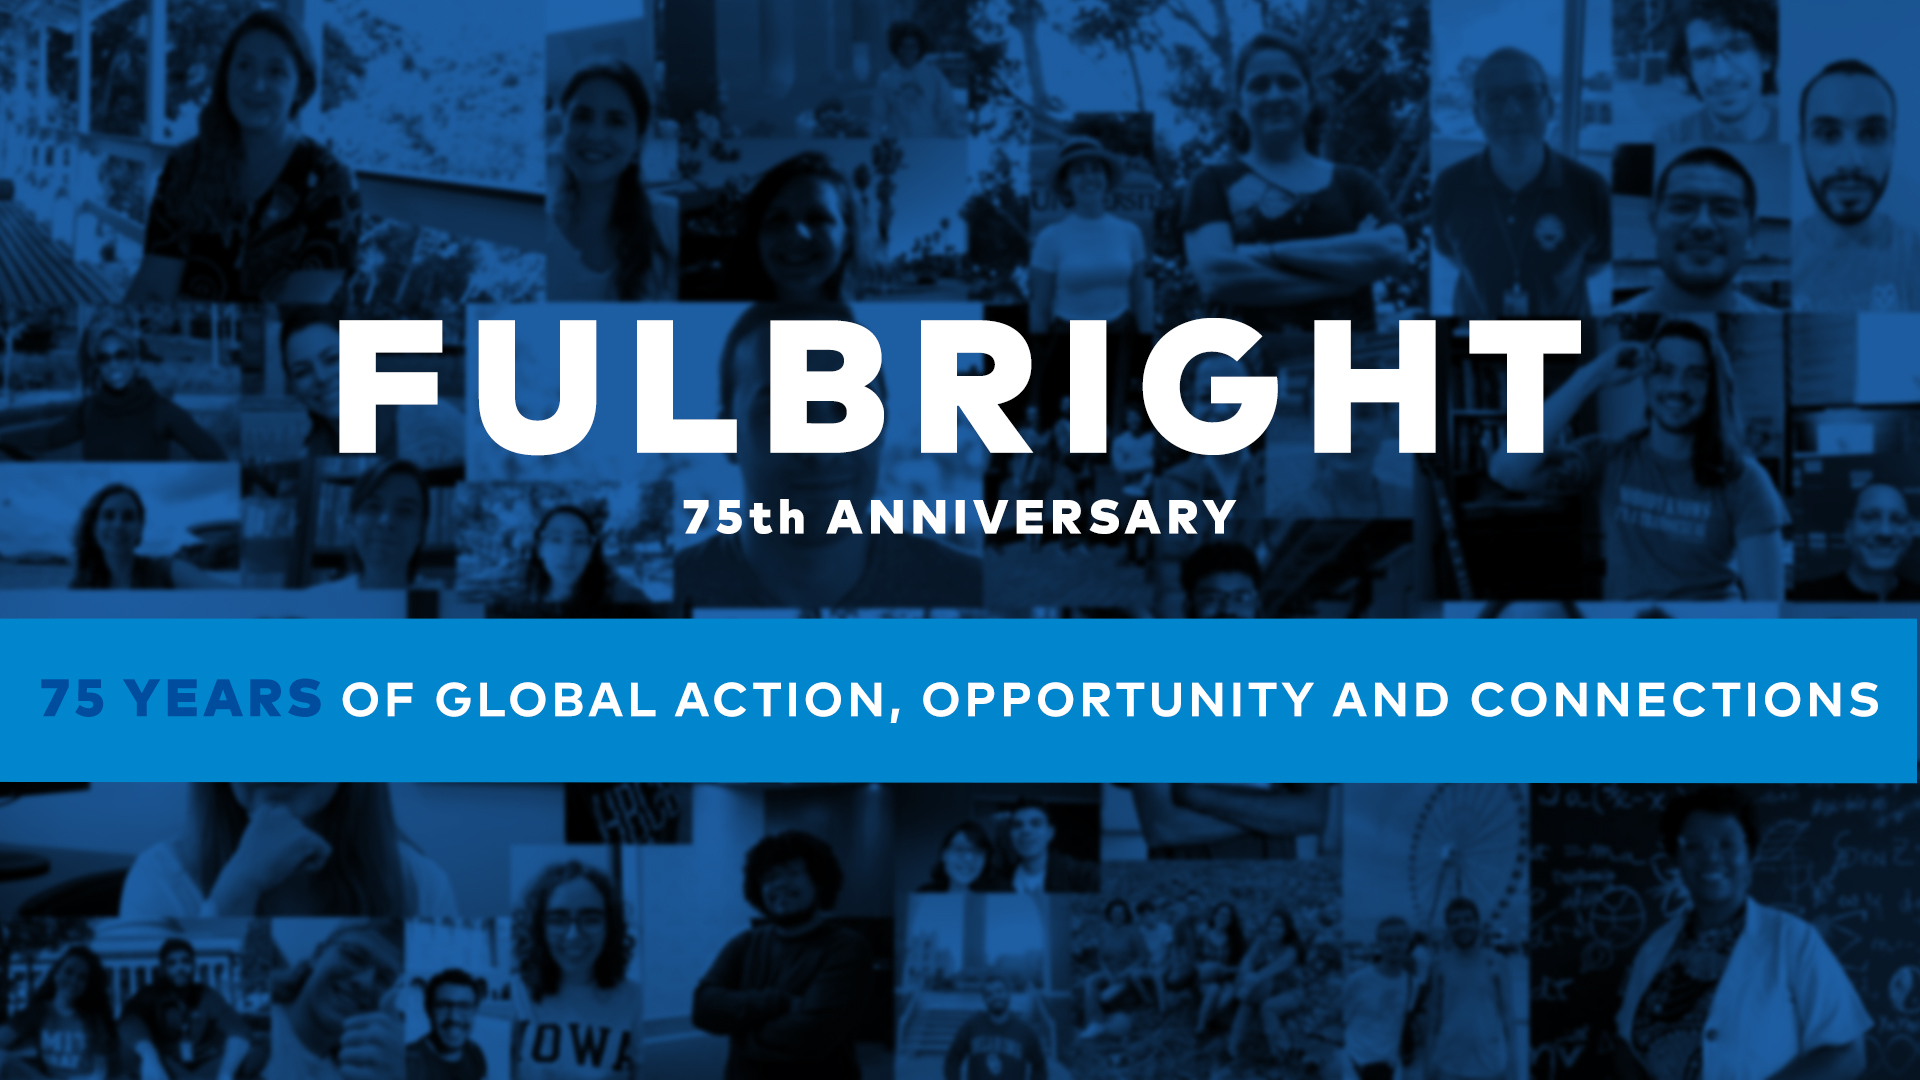 Blue overlay on photos of Fubright alumni with white text that says Fulbright 75th Anniversary